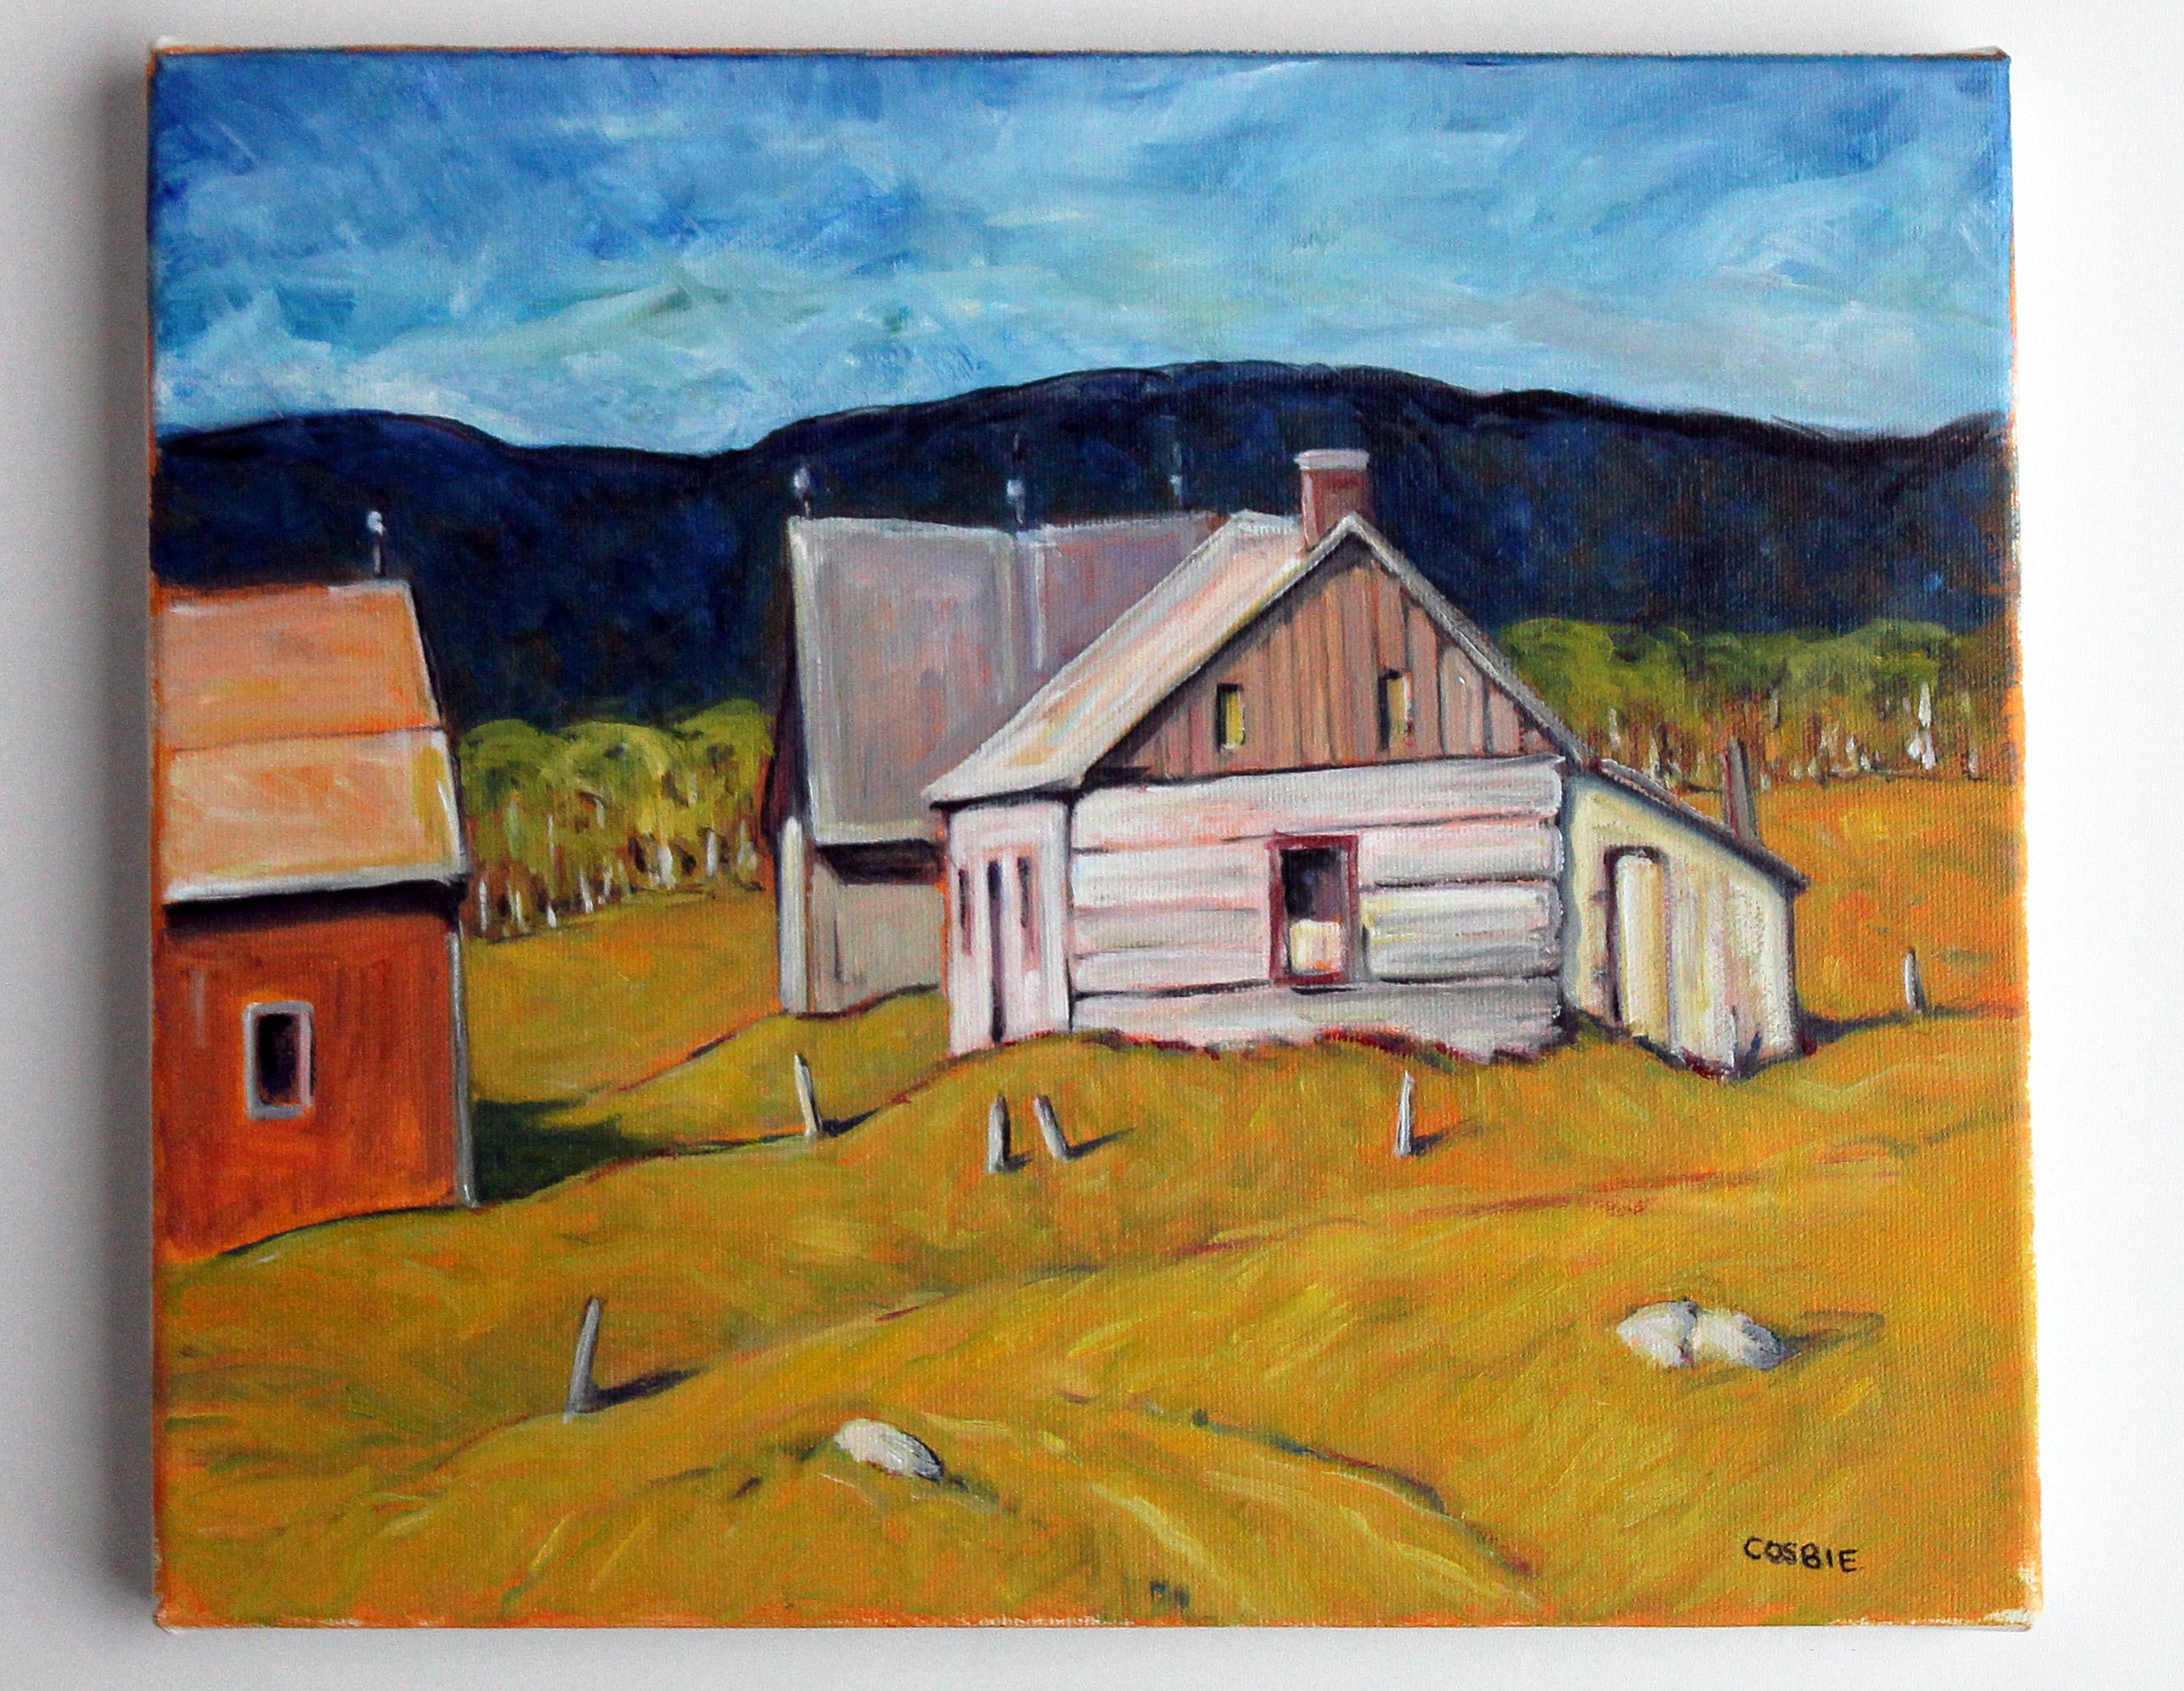 <p>Artist Comments<br>This painting depicts the rustic log houses populating the starting point of the Blue Ridge Trail, stretching from Southern Pennsylvania to Georgia. The saturated colors of the grass and the blue sky suggest a bright, sunny